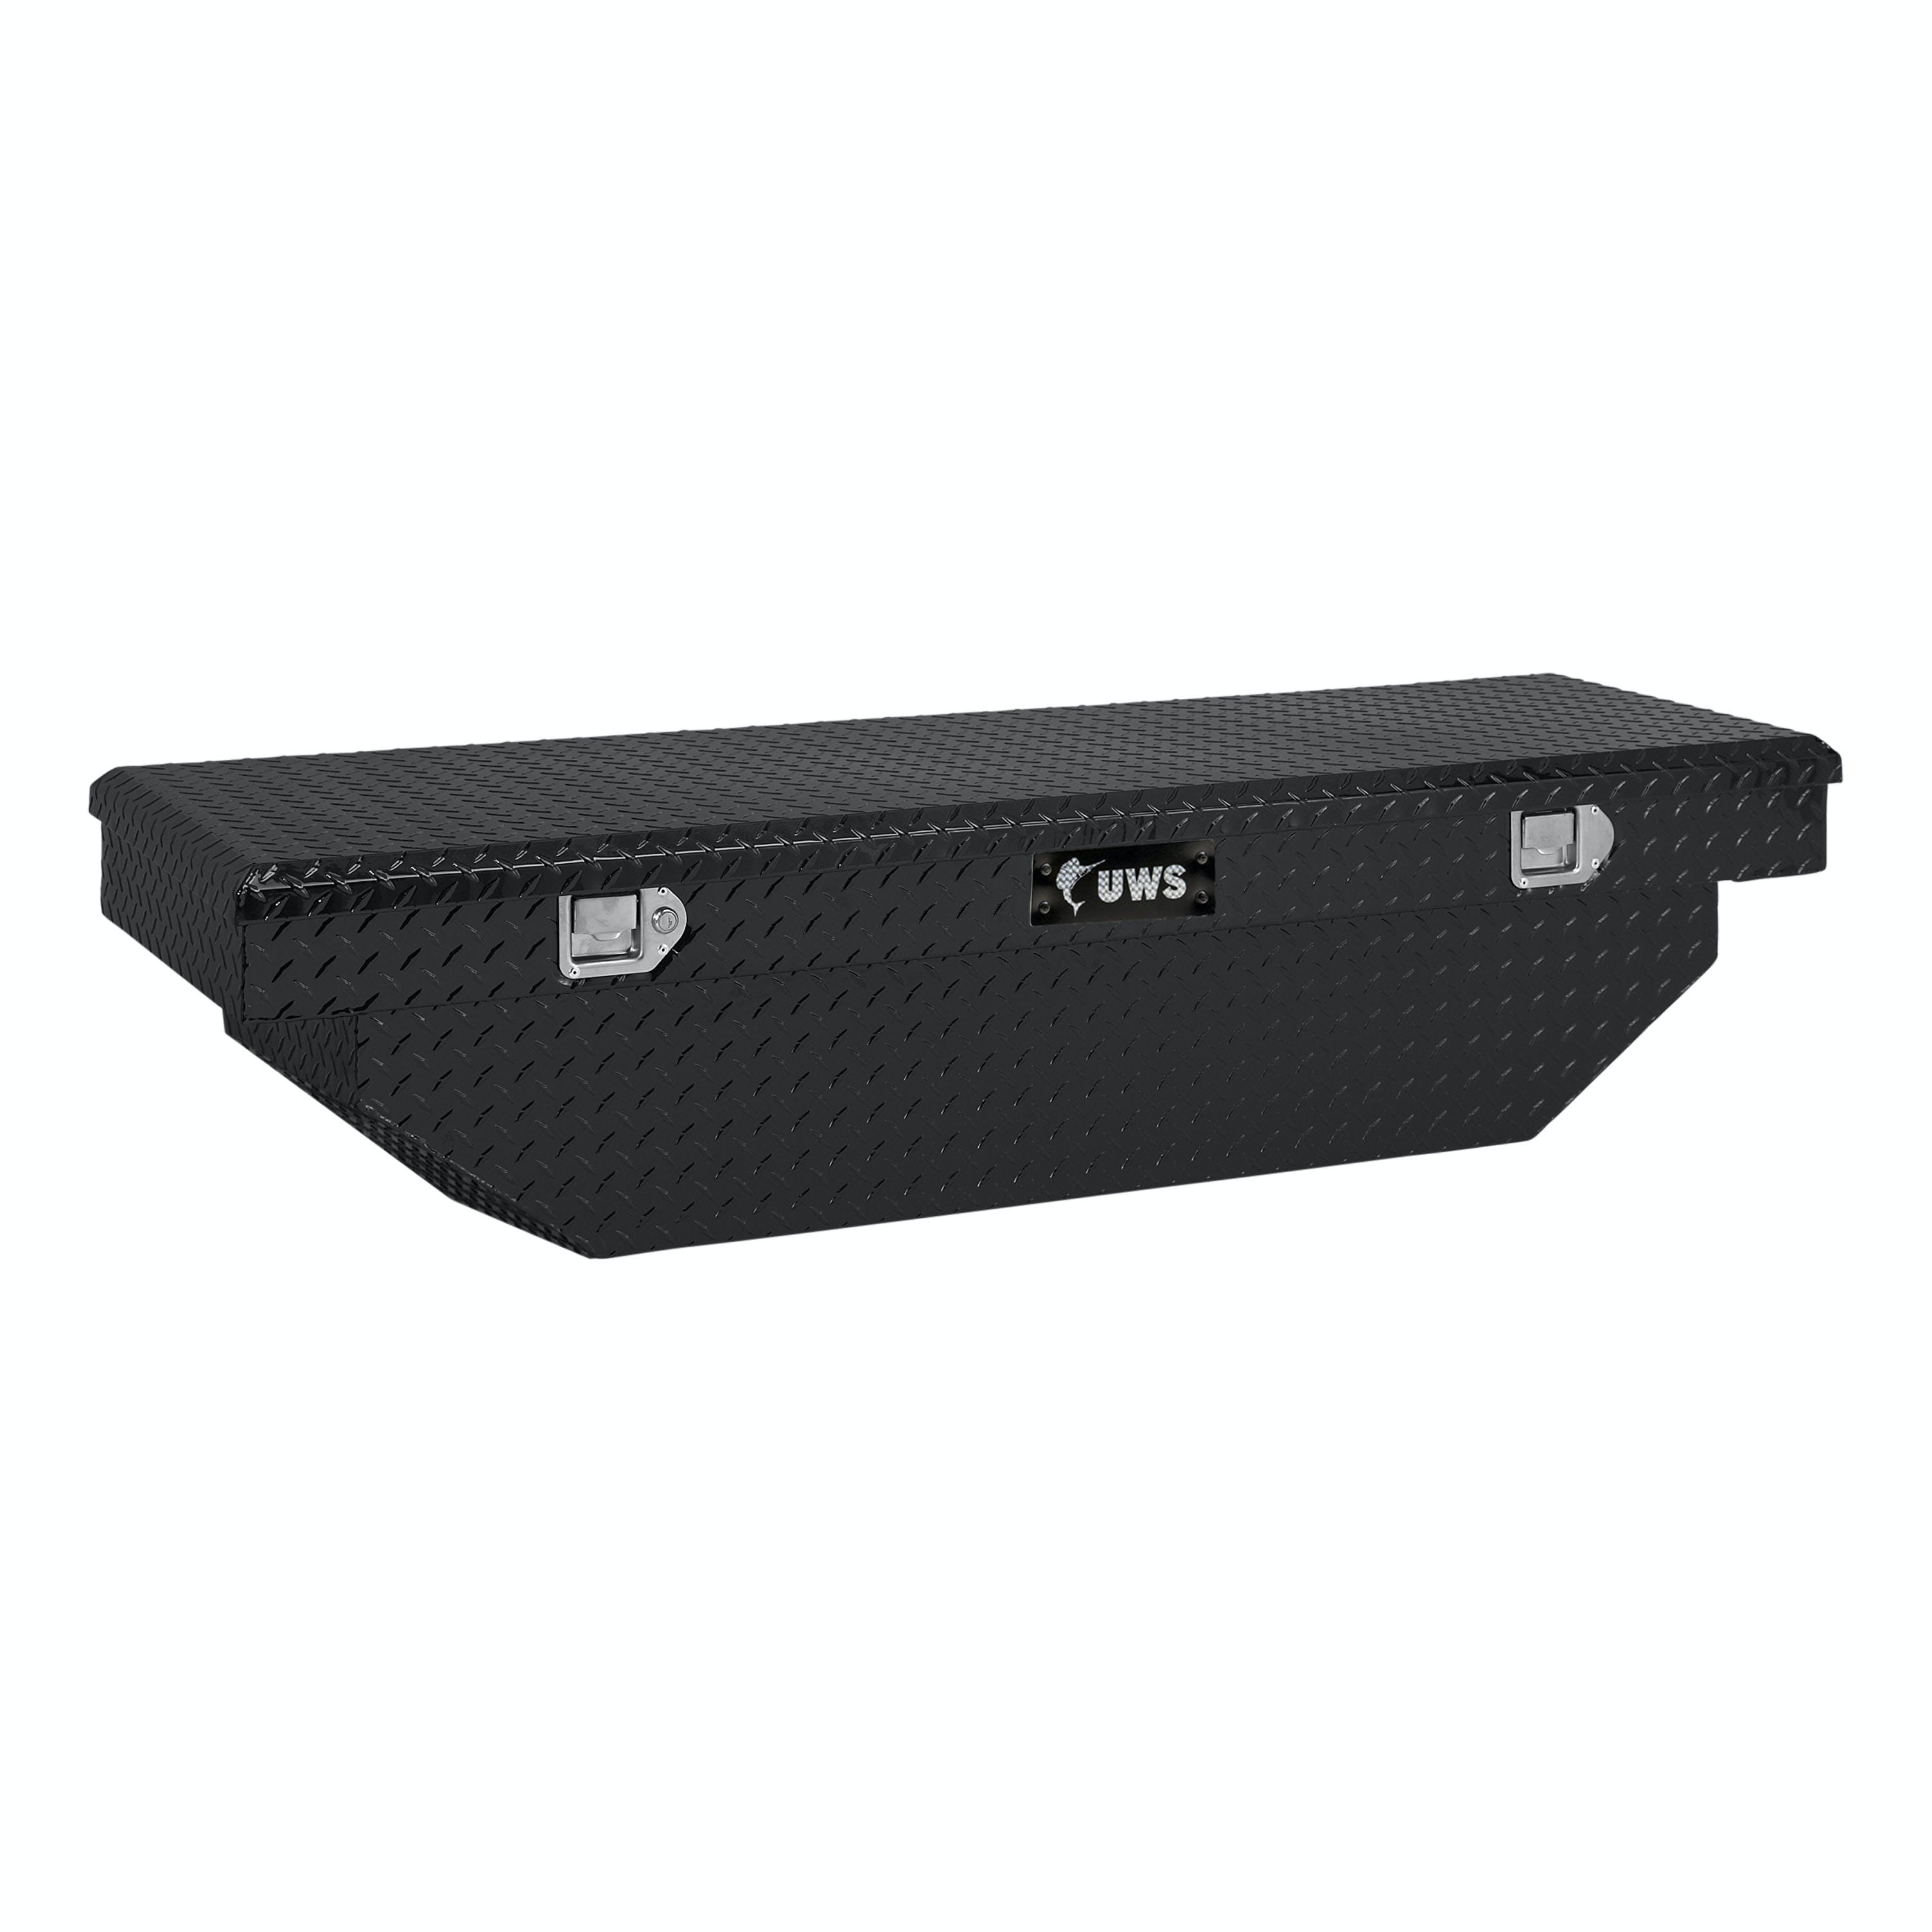 UWS EC10182 60 in. Angled Crossover Truck Tool Box